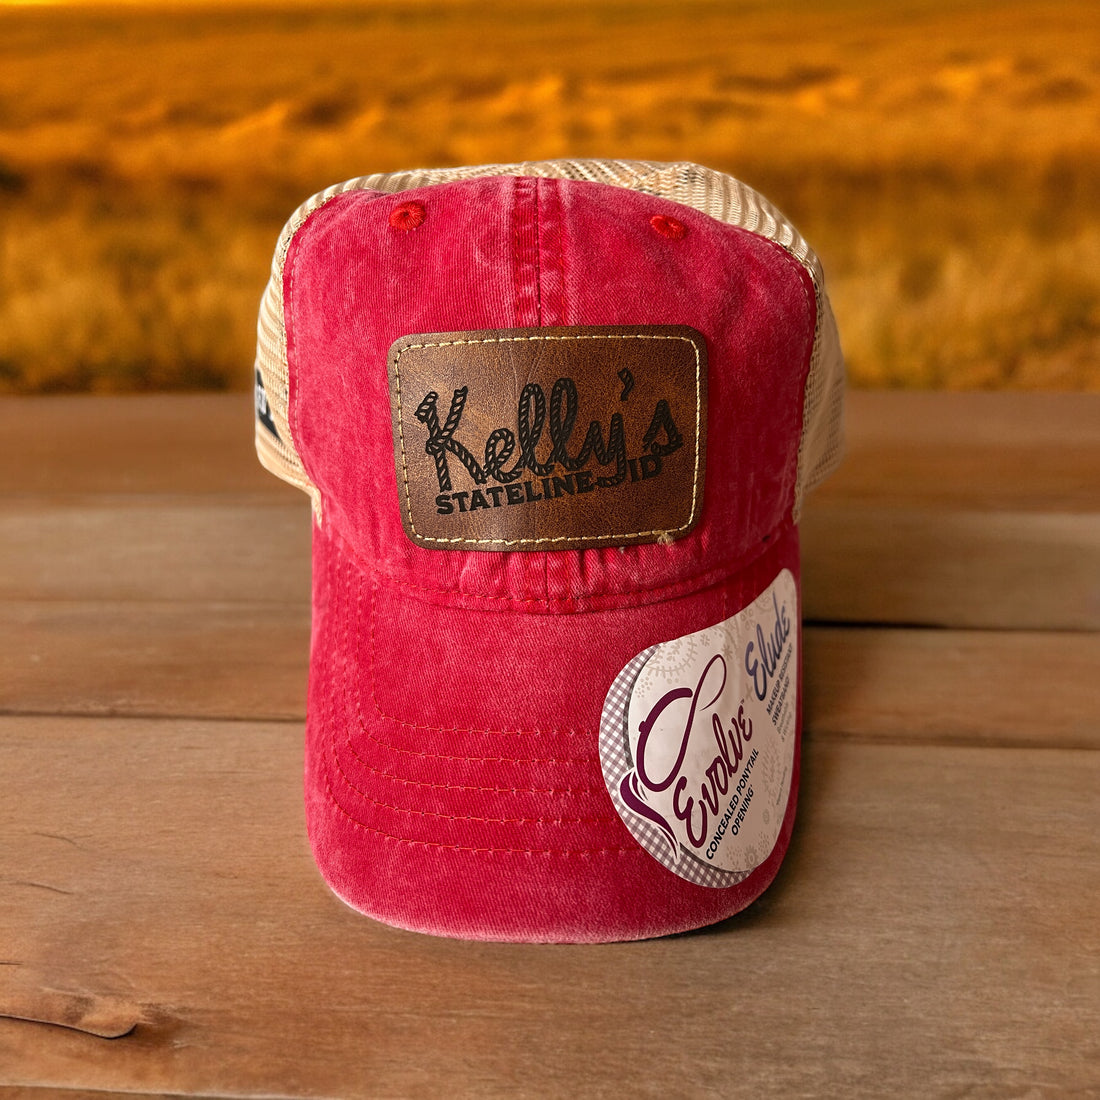  Image of Kelly's Stateline Red/Leopard Ponytail Cap with a brown patch, featuring an integrated ID slot, perfect for showcasing style and convenience at events with durable construction and a comfortable fit.